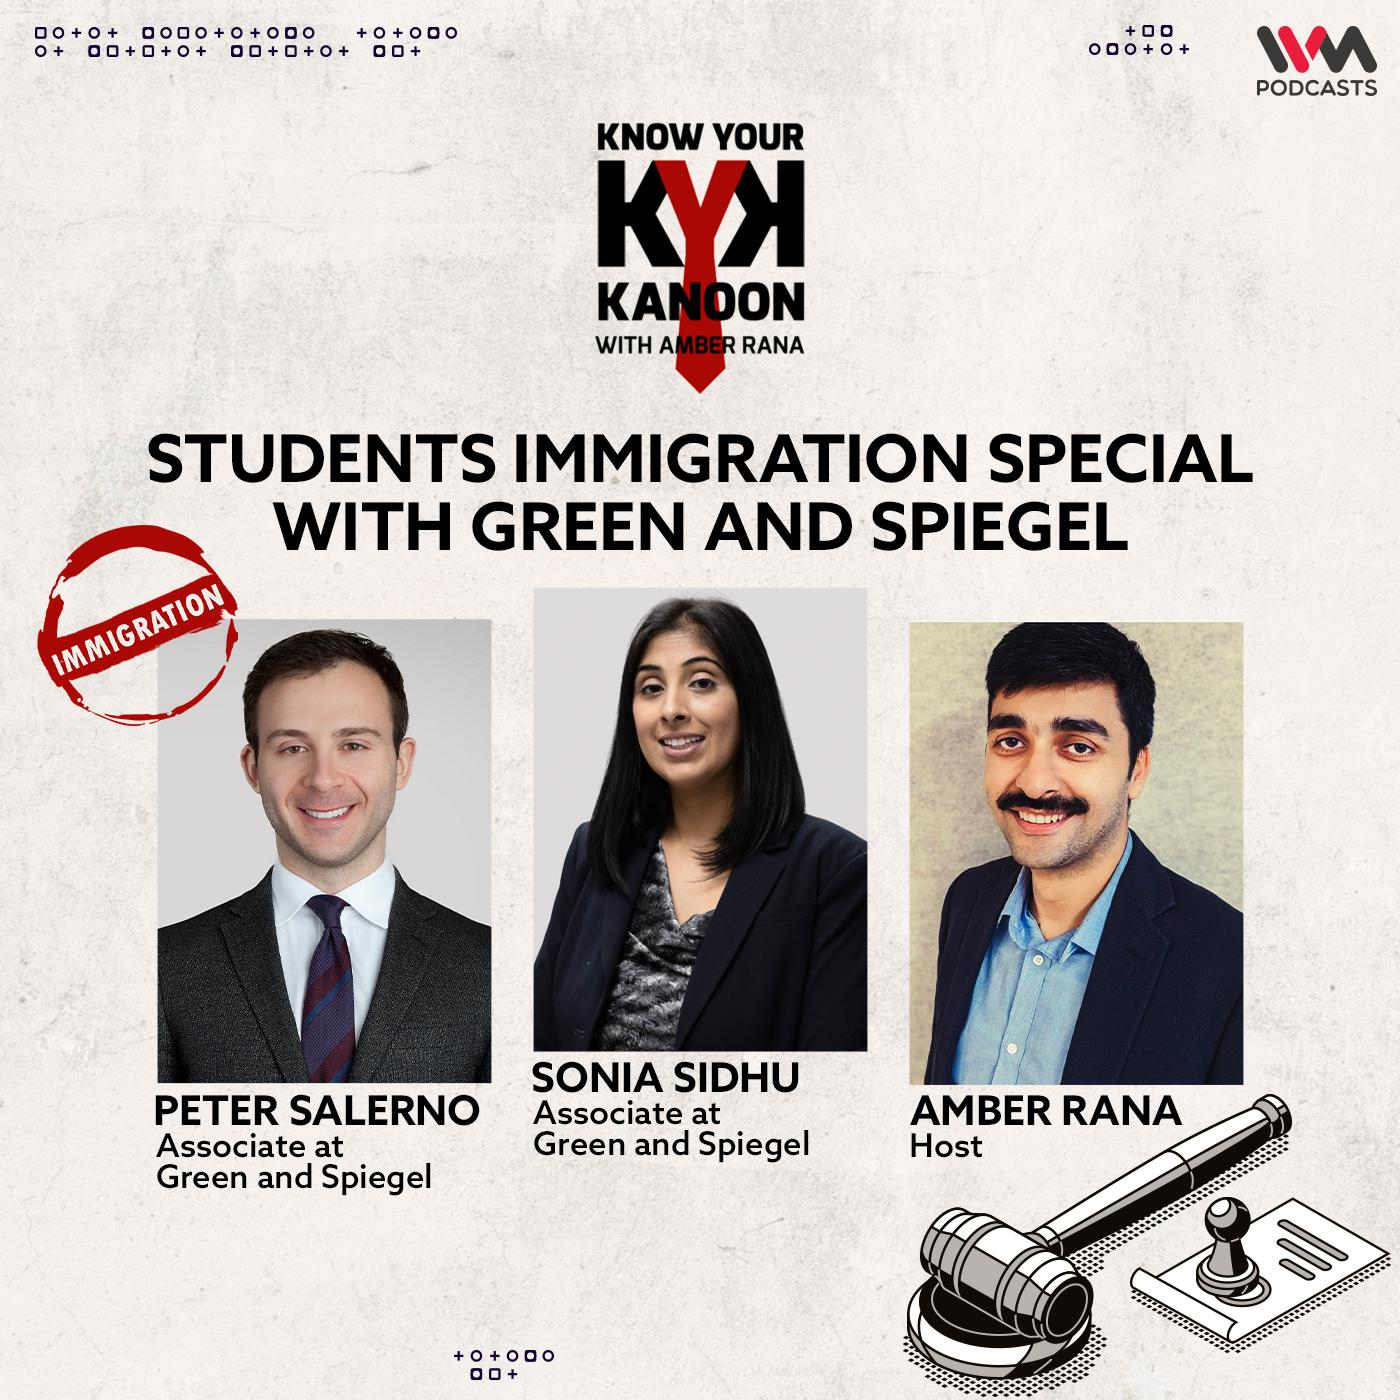 S04 E16: Students Immigration Special with Green and Spiegel